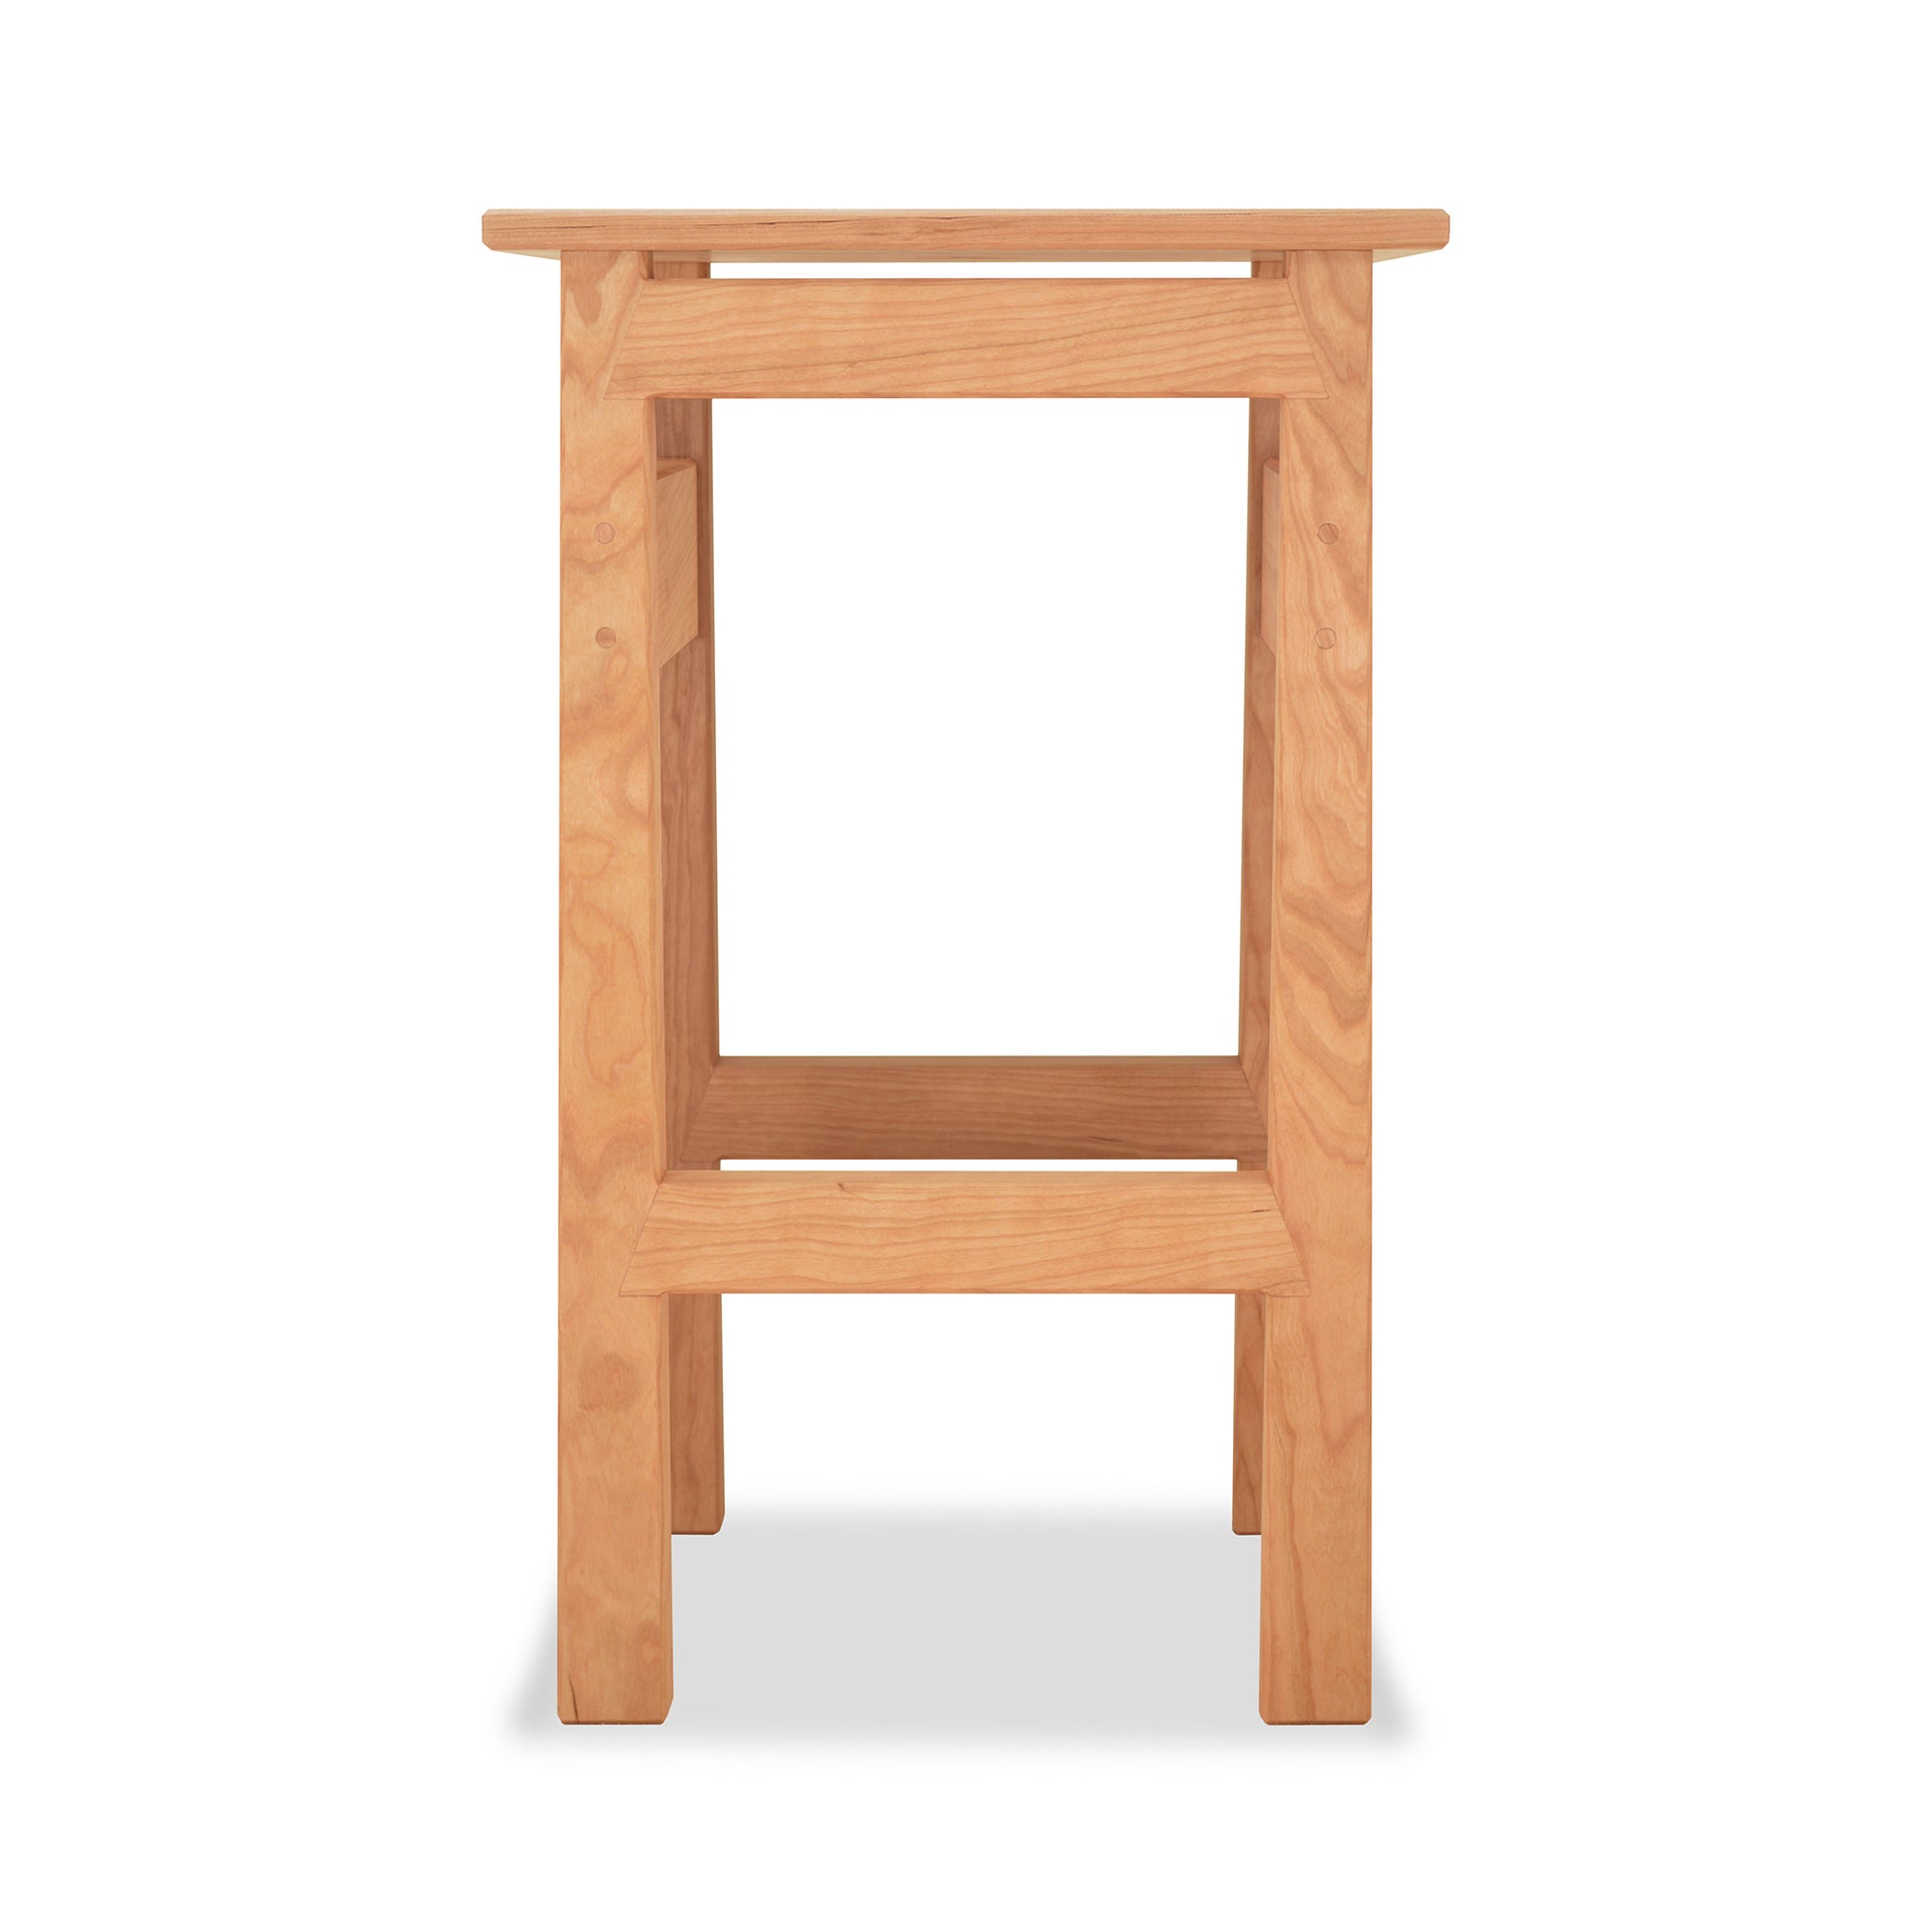 A Maple Corner Woodworks contemporary Asian stool, eco-friendly and made of natural wood with a single step, isolated against a white background.